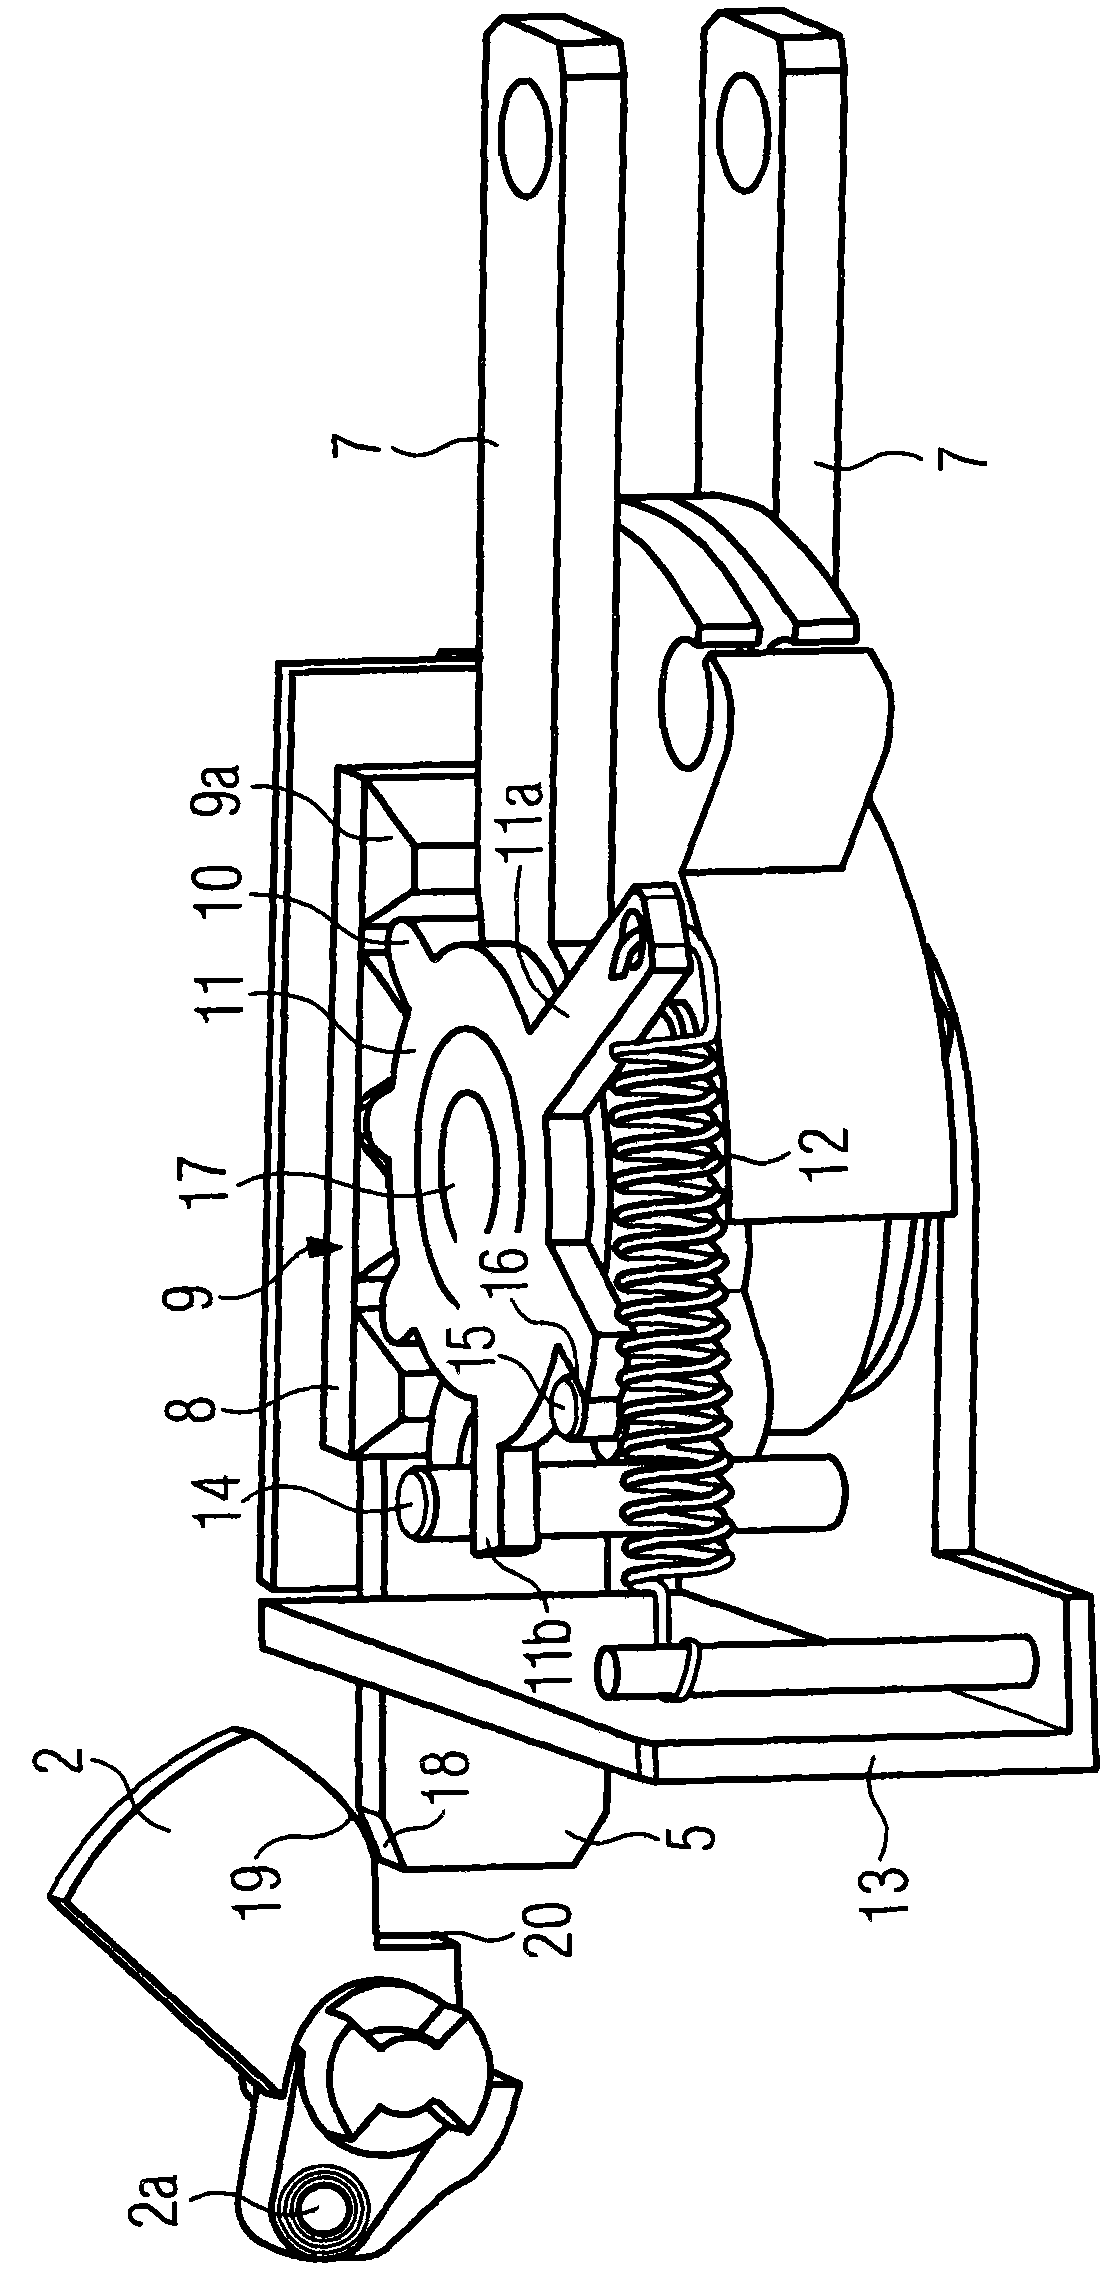 Device for mutual locking of two switches, especially circuit breaker